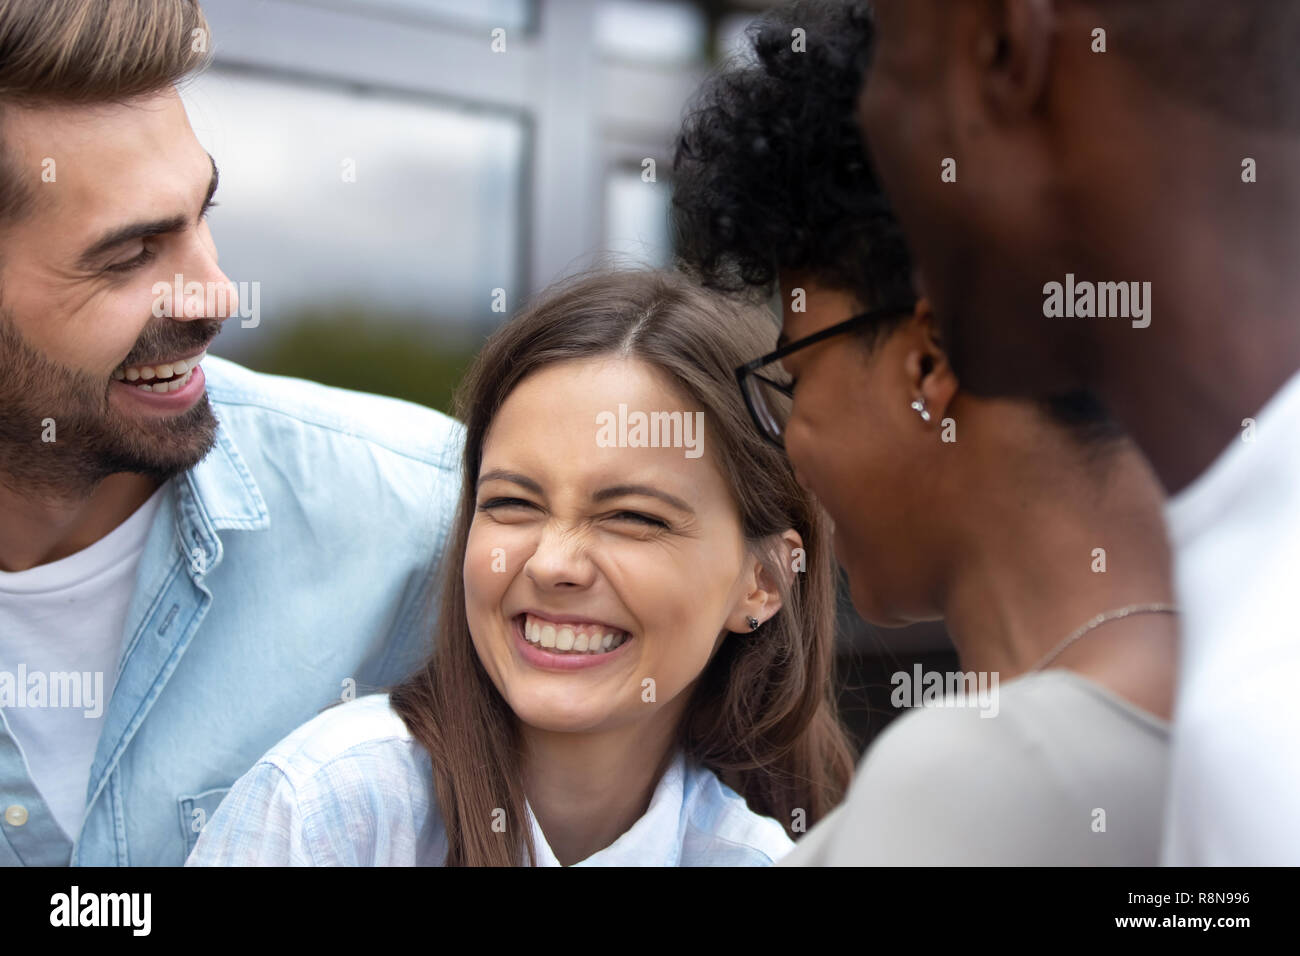 Young happy woman laughing at joke with friends close up Stock Photo